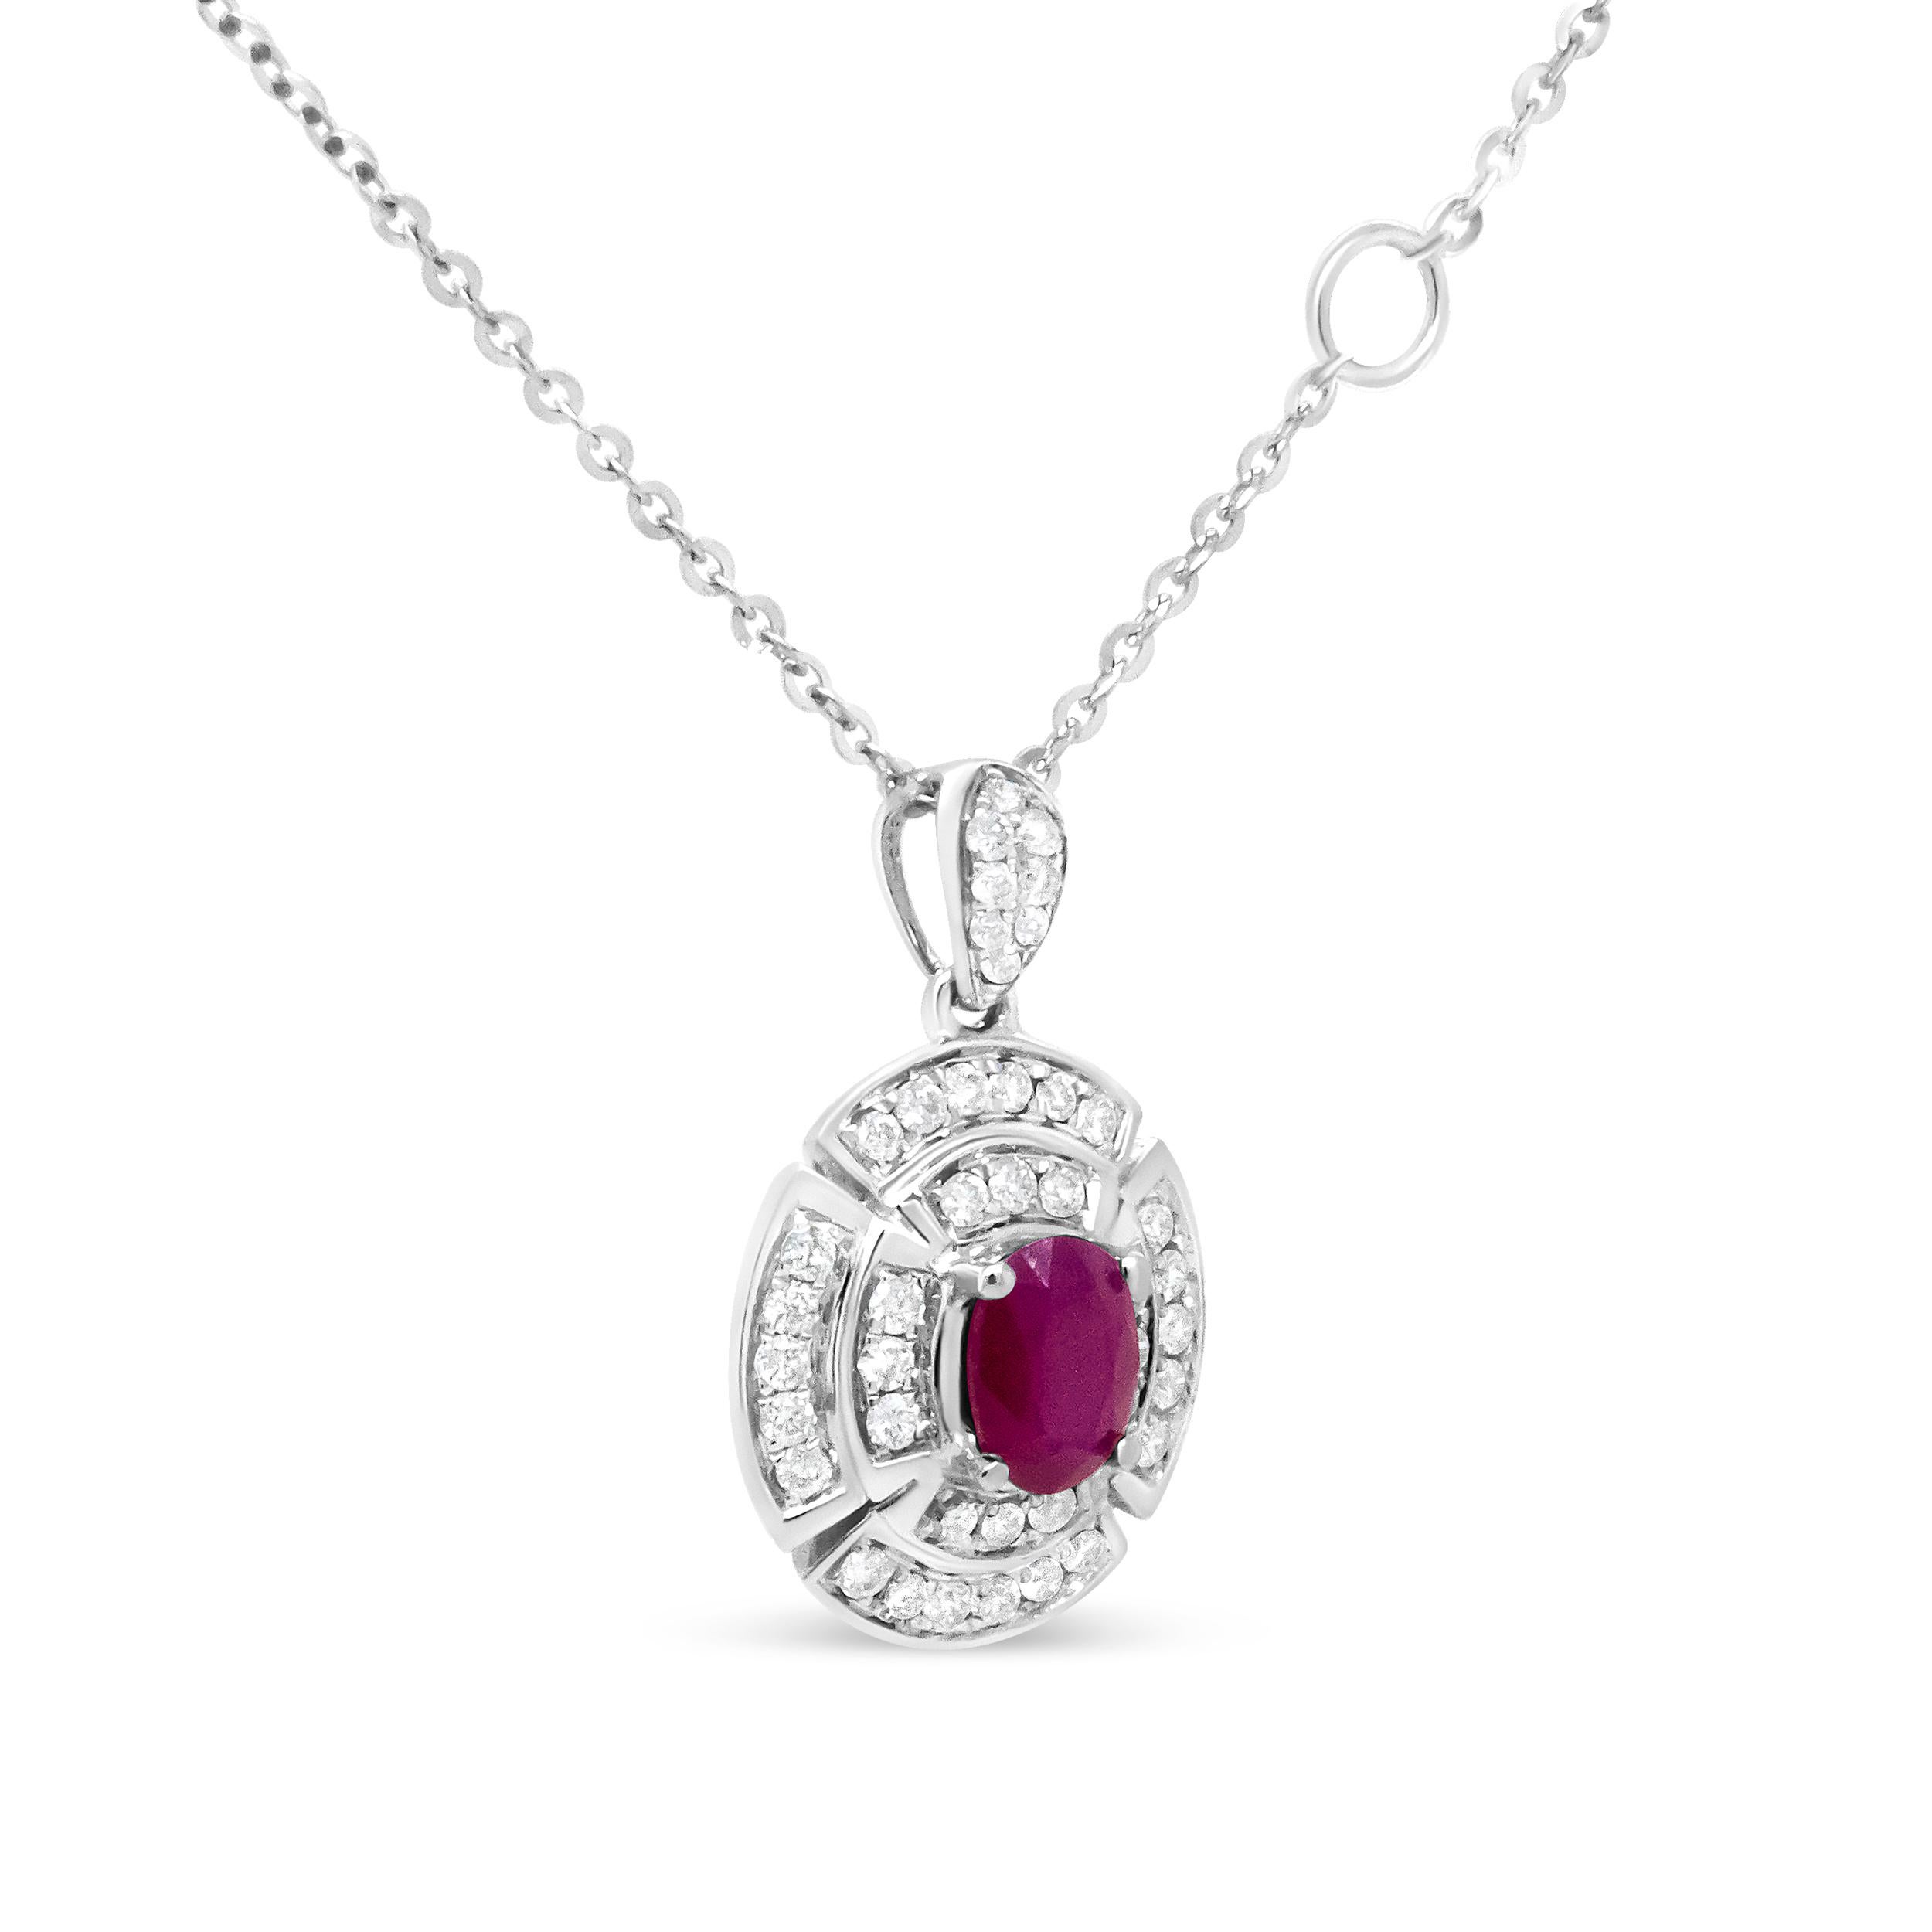 Contemporary 18K White Gold 1/5 Carat Round Diamond and Red Ruby Double Halo Pendant Necklace